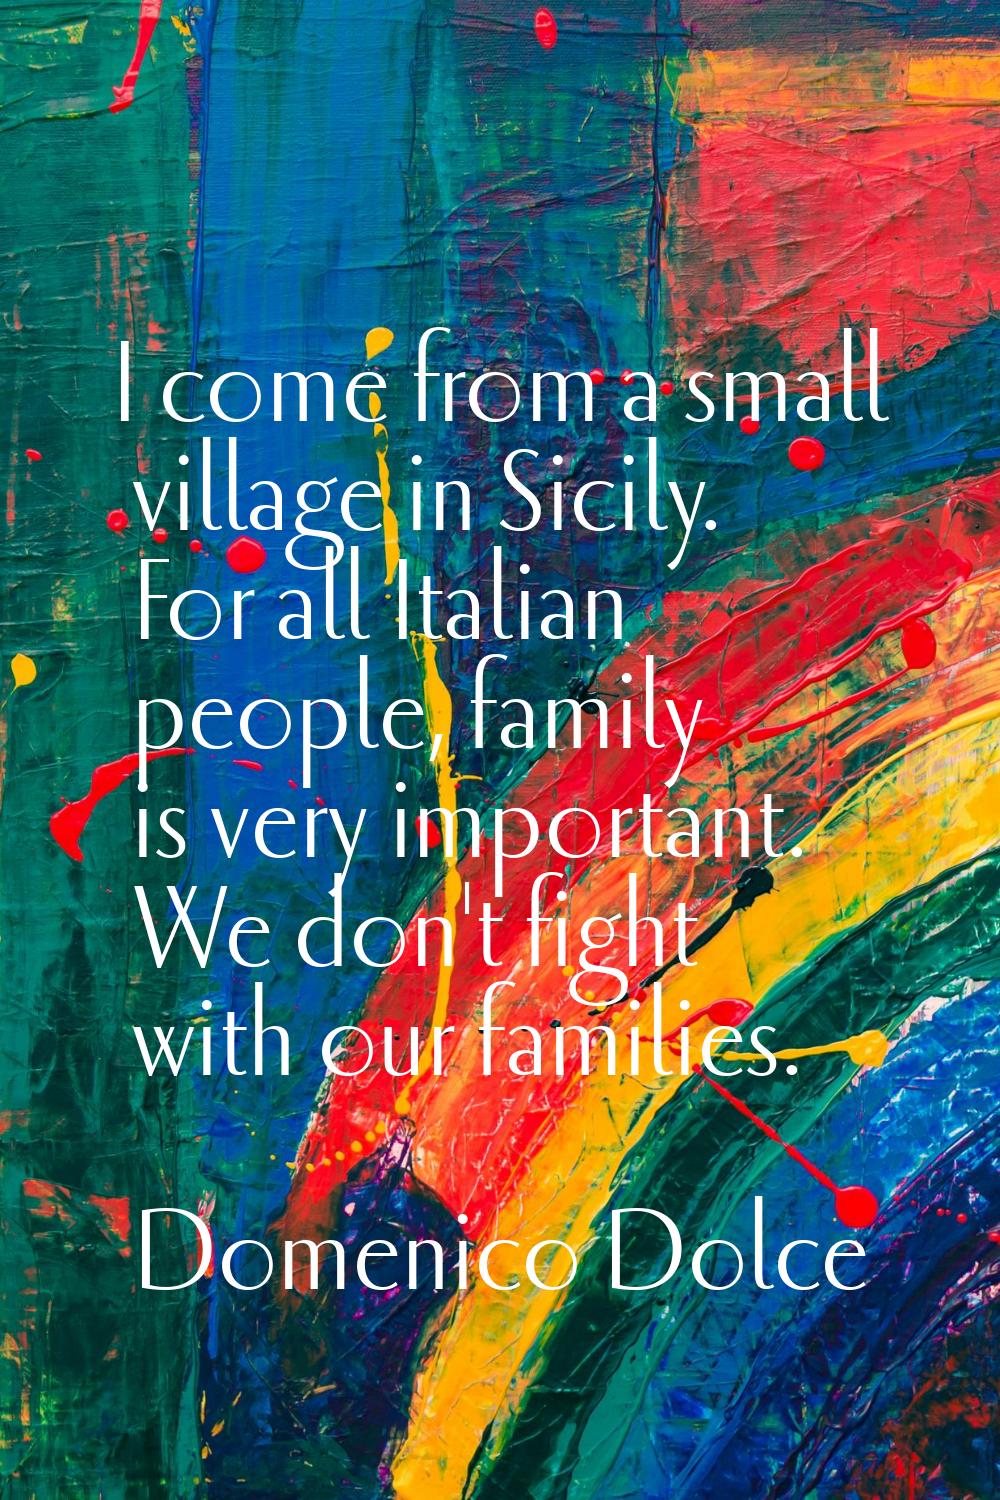 I come from a small village in Sicily. For all Italian people, family is very important. We don't f